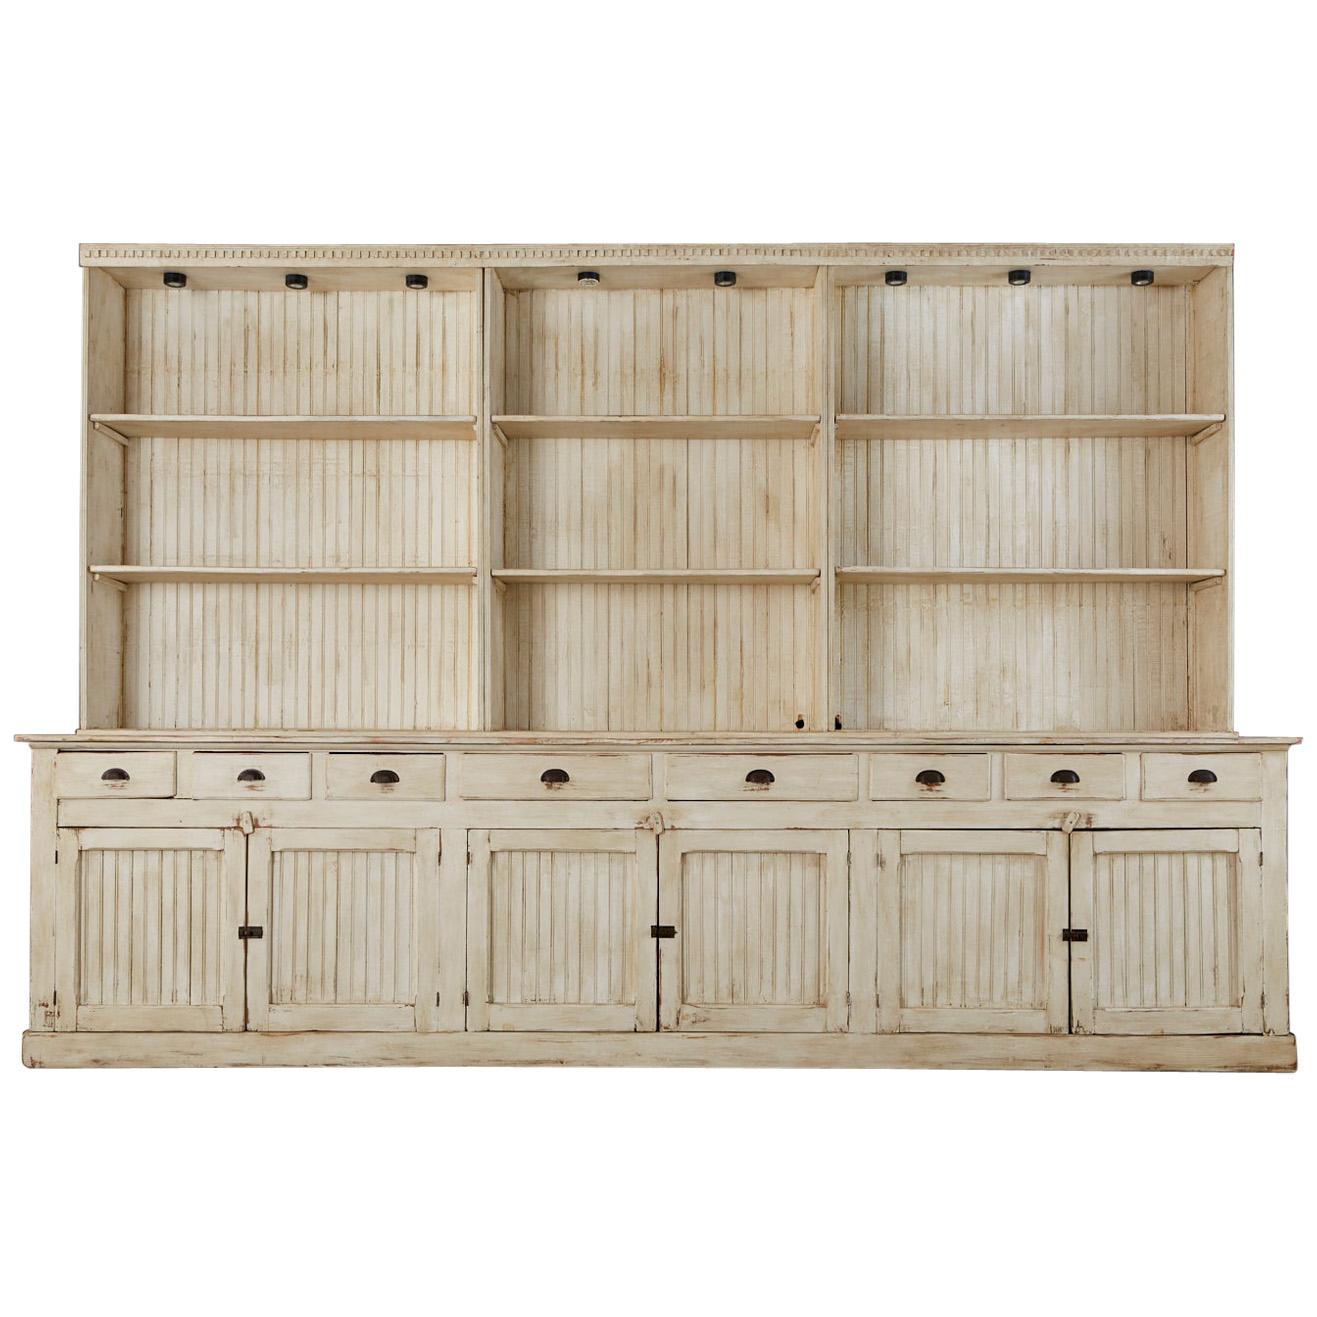 American Painted Pine Kitchen Cabinet Cupboard or Bookcase